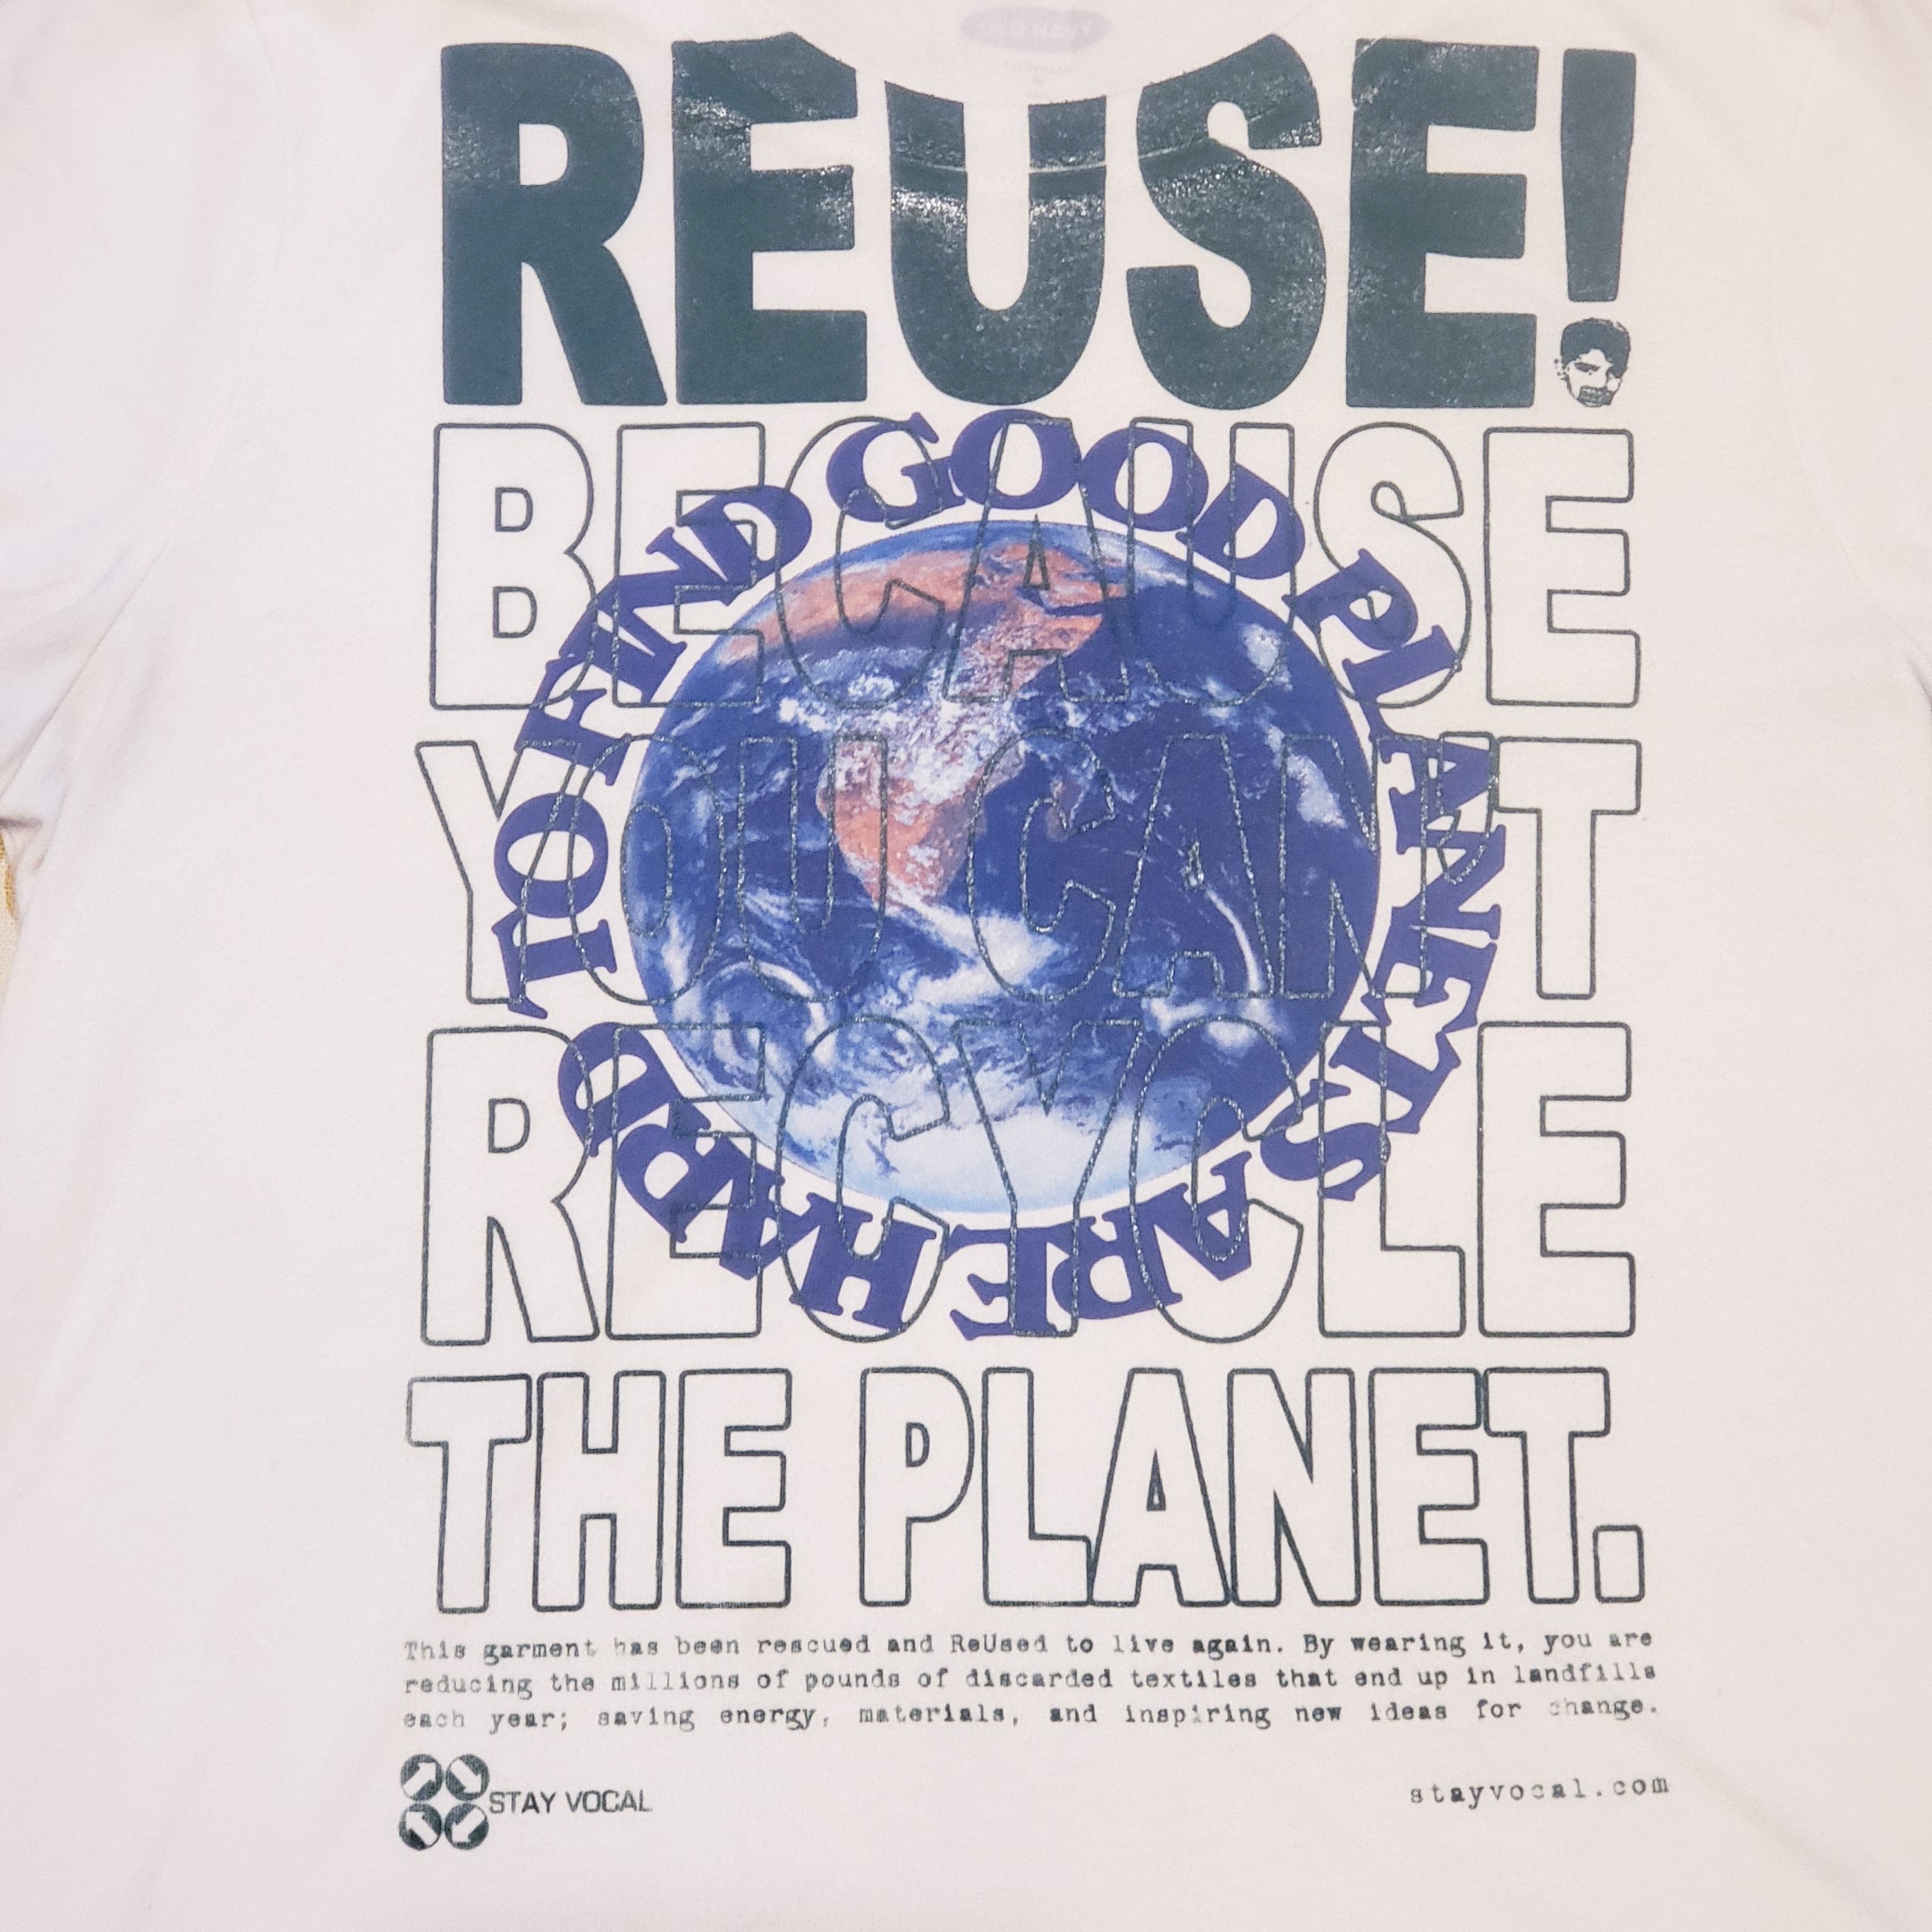 One of a Kind (Women's M) REUSE! Because Good Planets Are Hard To Find T-Shirt